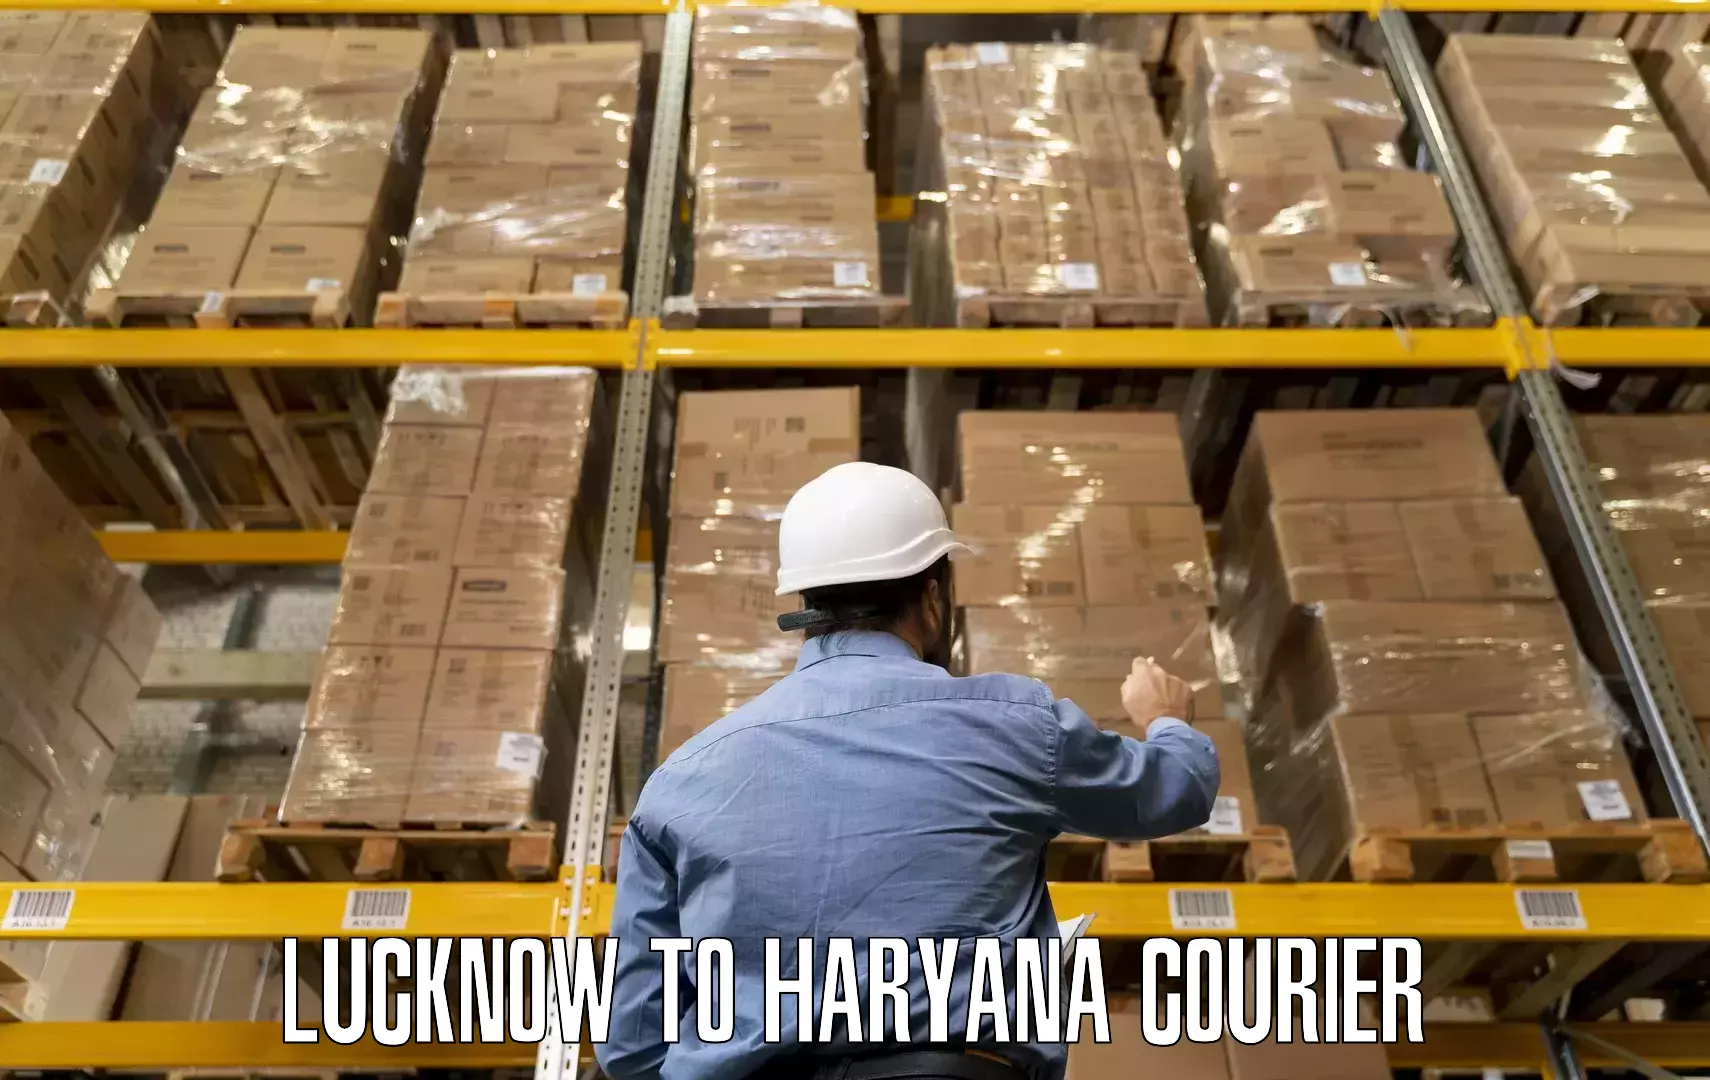 Professional packing and transport Lucknow to NCR Haryana